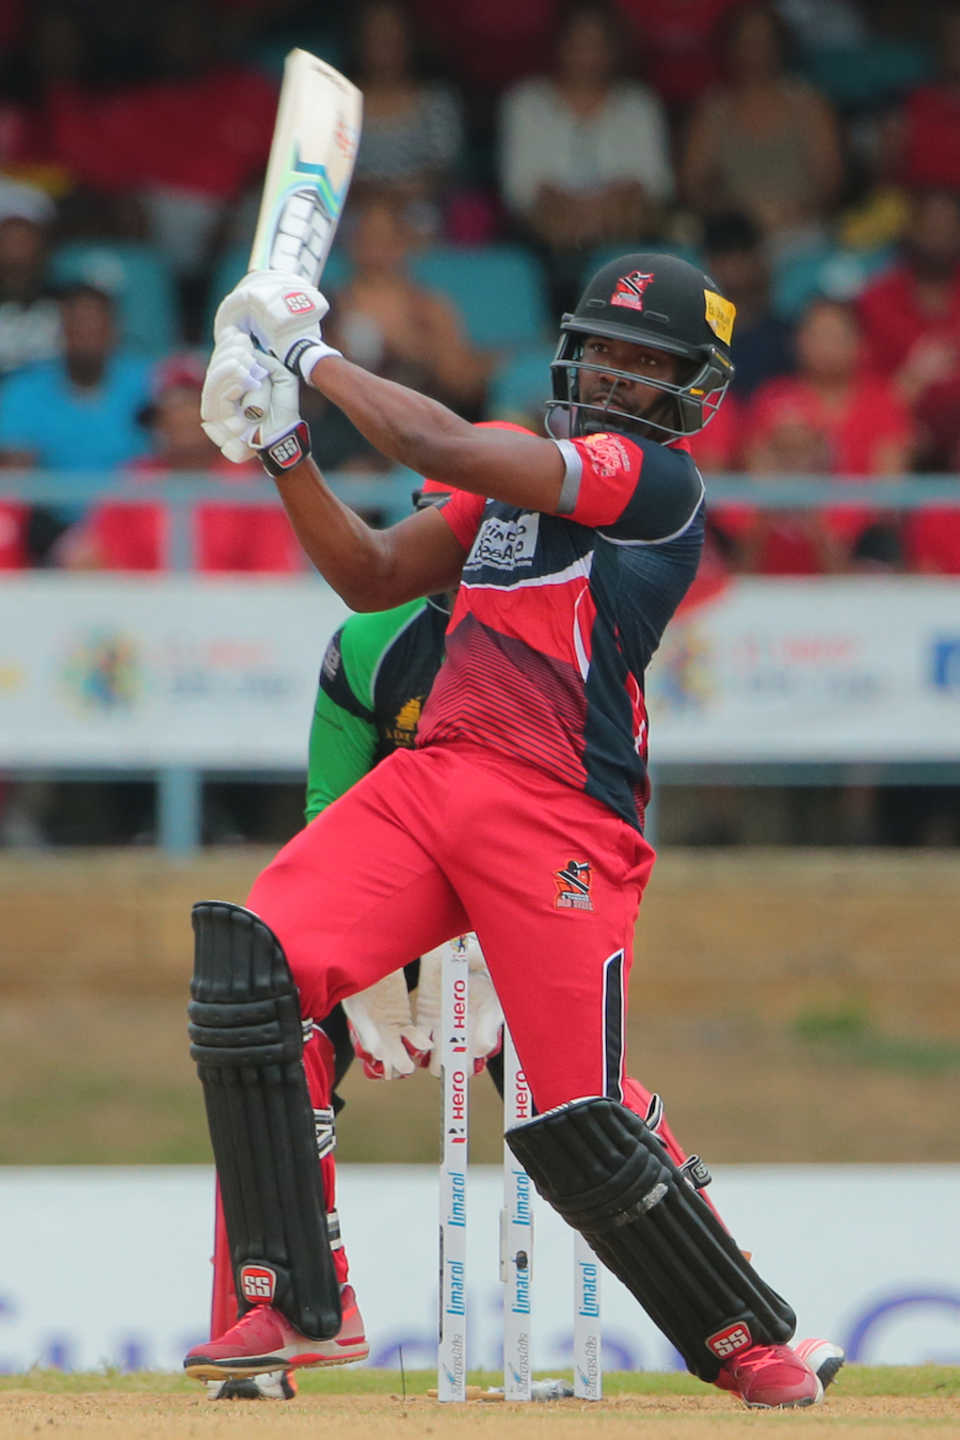 Darren Bravo hammered five sixes in the 15 balls he faced, Trinidad & Tobago Red Steel v St Kitts and Nevis Patriots, CPL 2015, Port-of-Spain, July 18, 2015